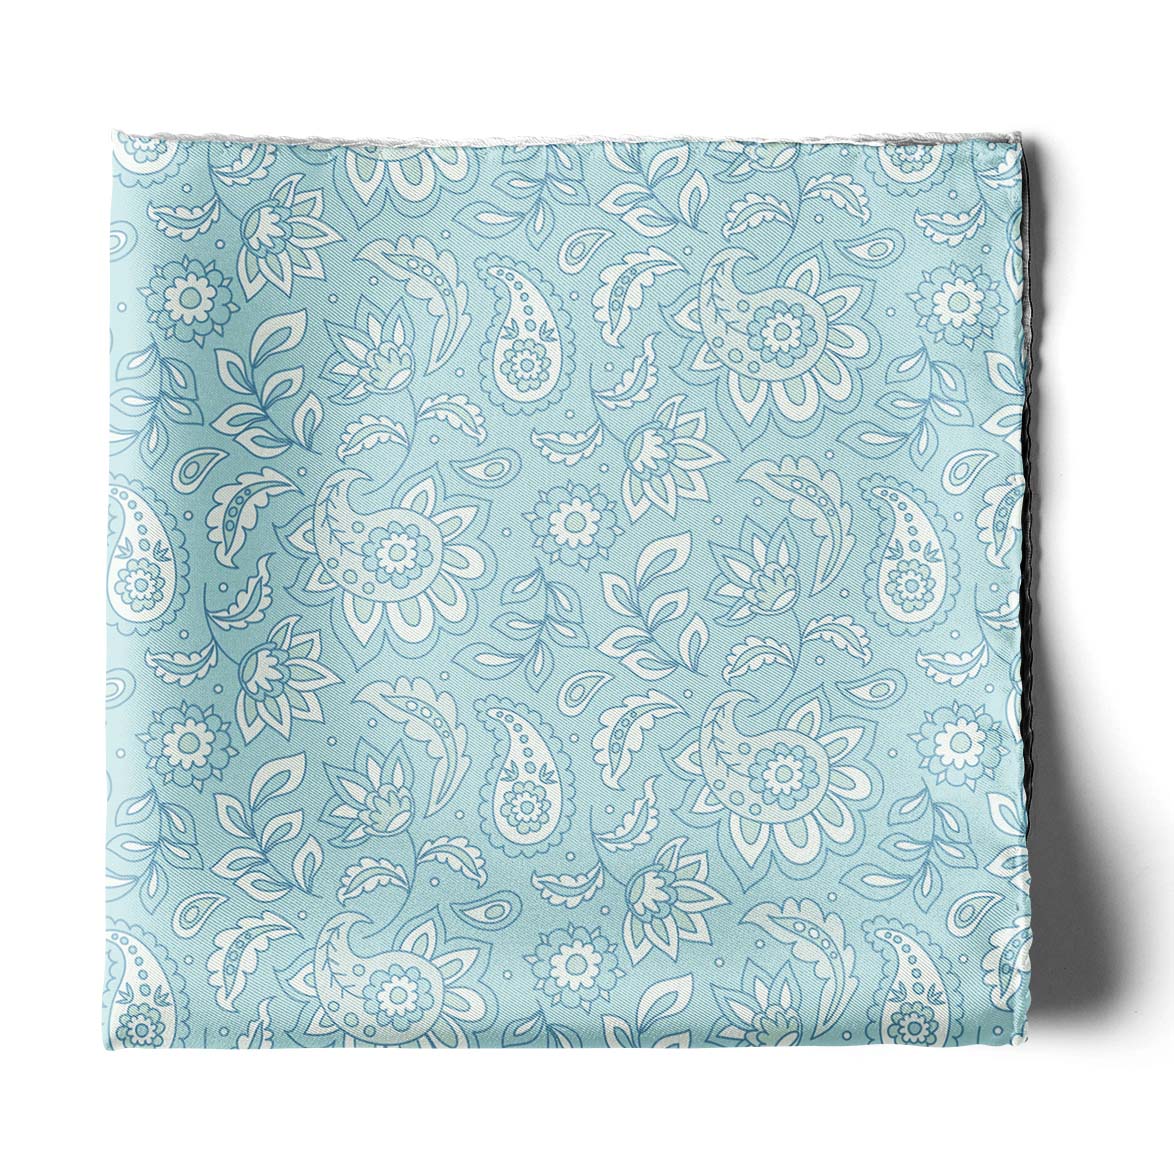 FOUR IN ONE PASTEL ICE BLUE SILK POCKET SQUARE